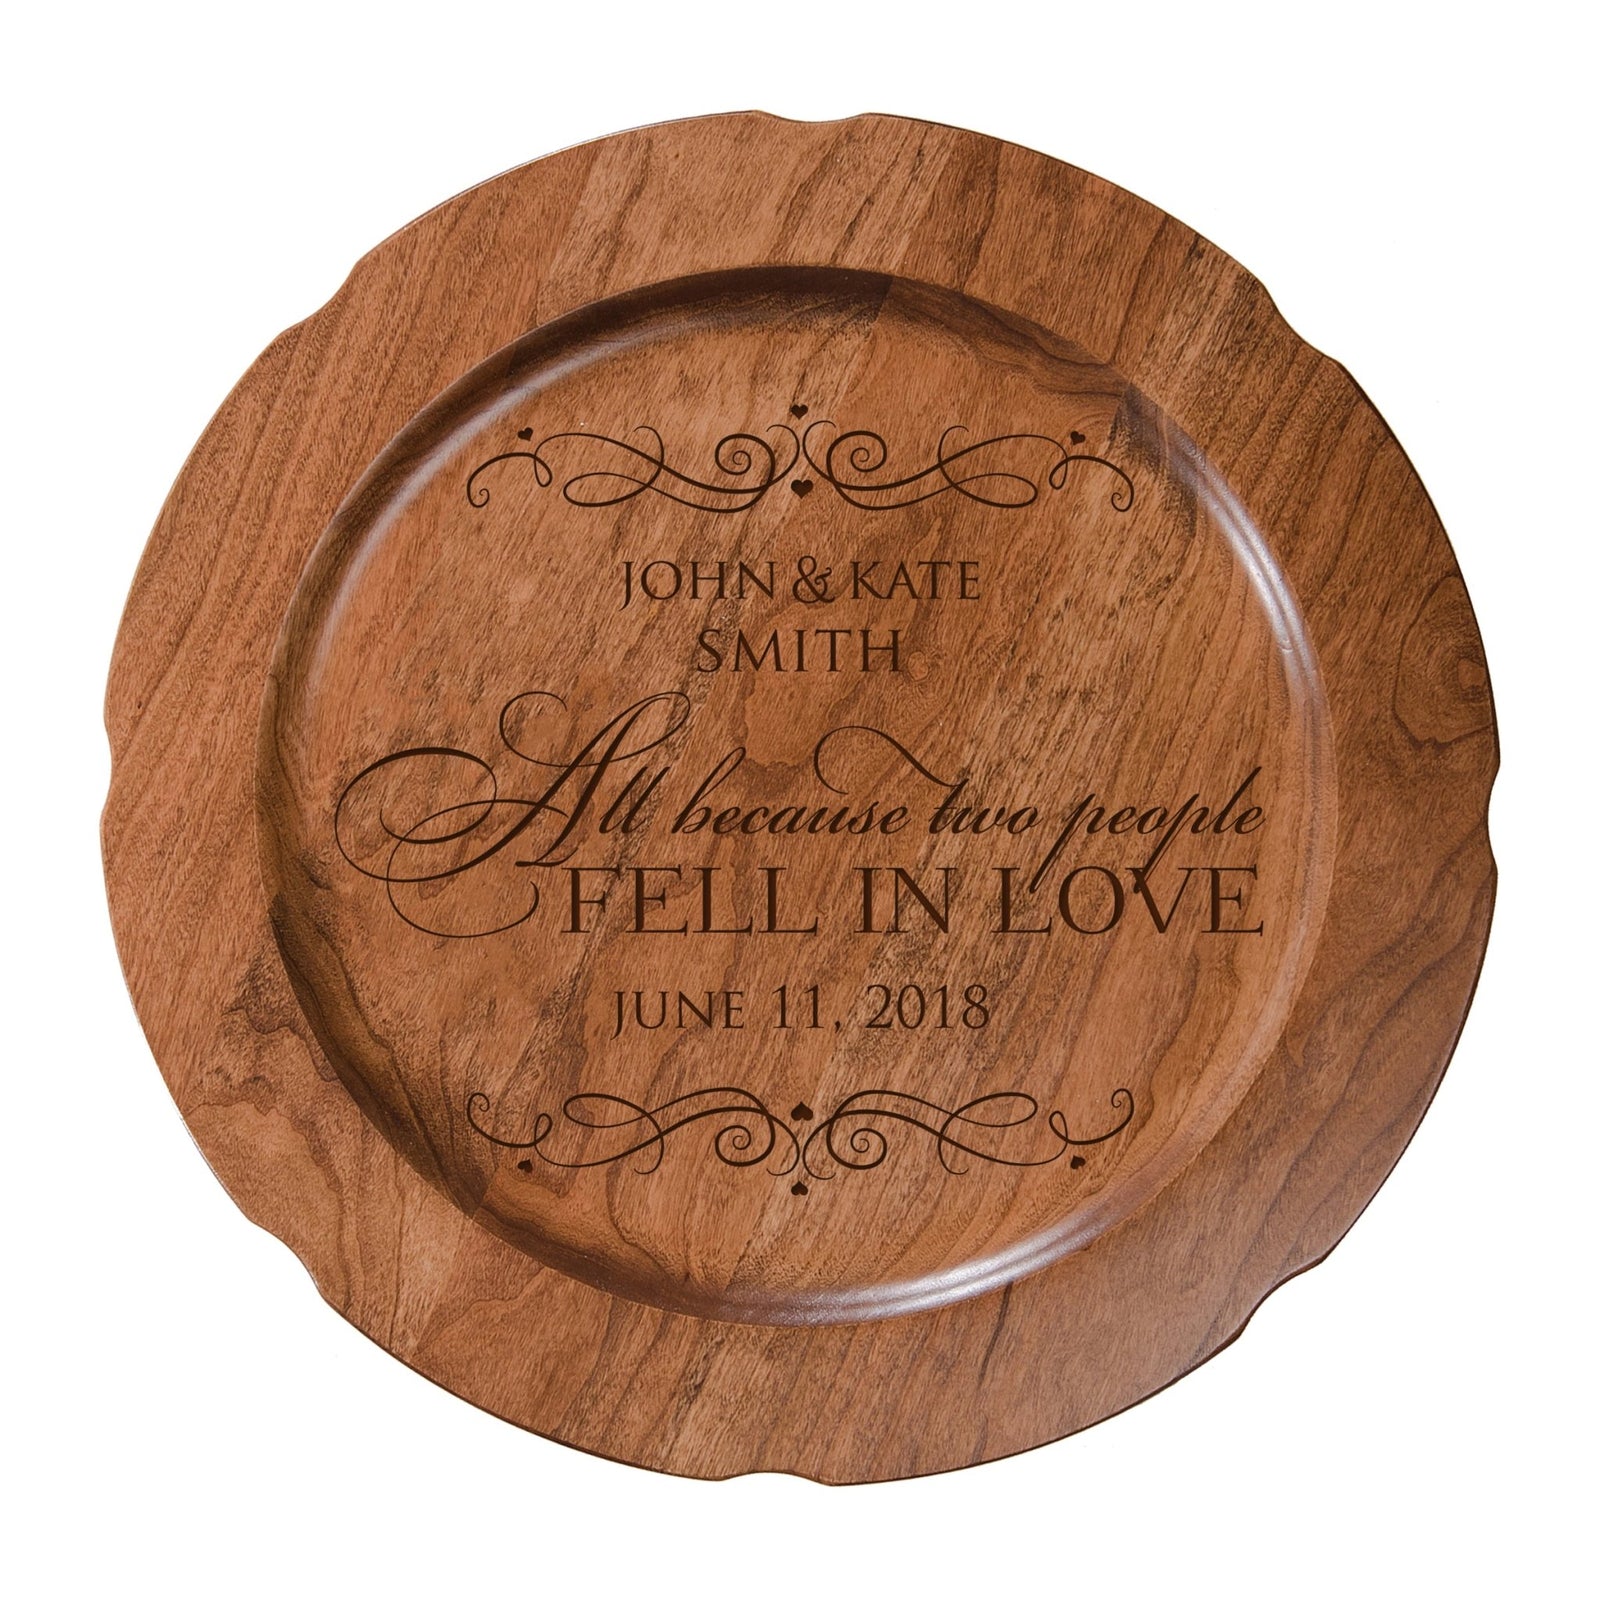 Personalized Inspirational Plates With Quotes - All Because Two People - LifeSong Milestones